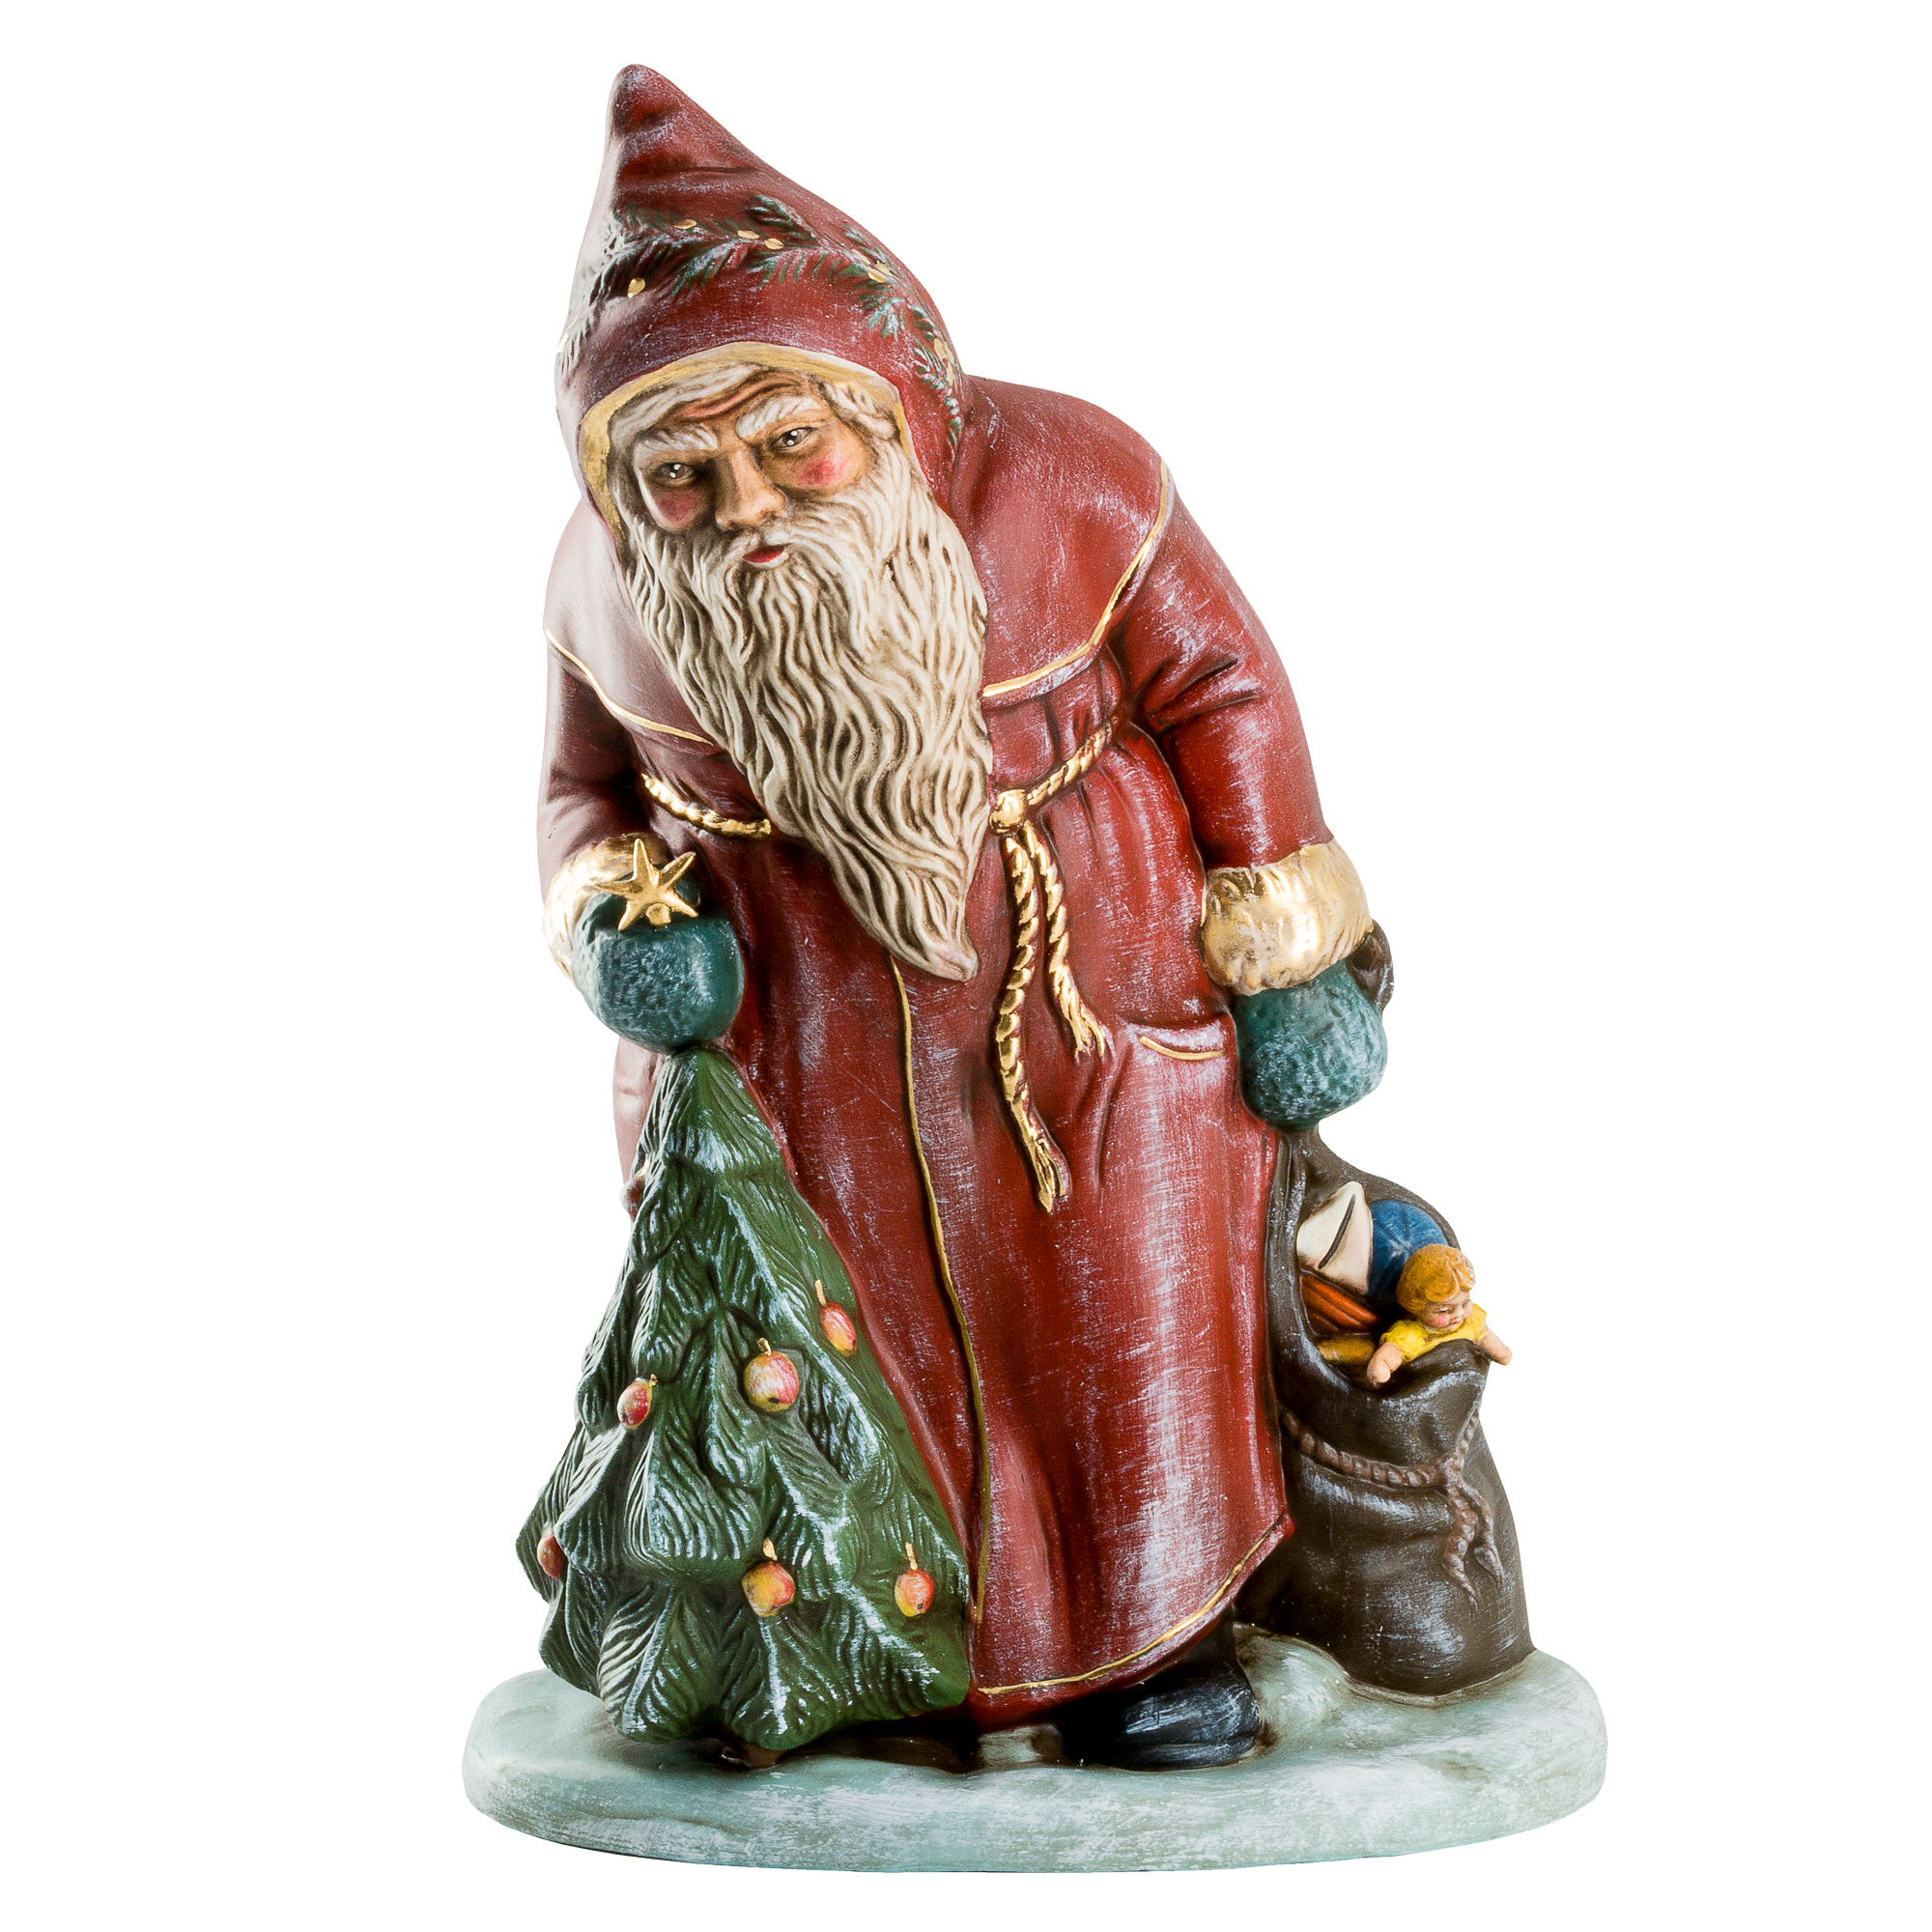 Nicholas with tree and sack, red with golden ornaments, Height: 13 in., in wooden box